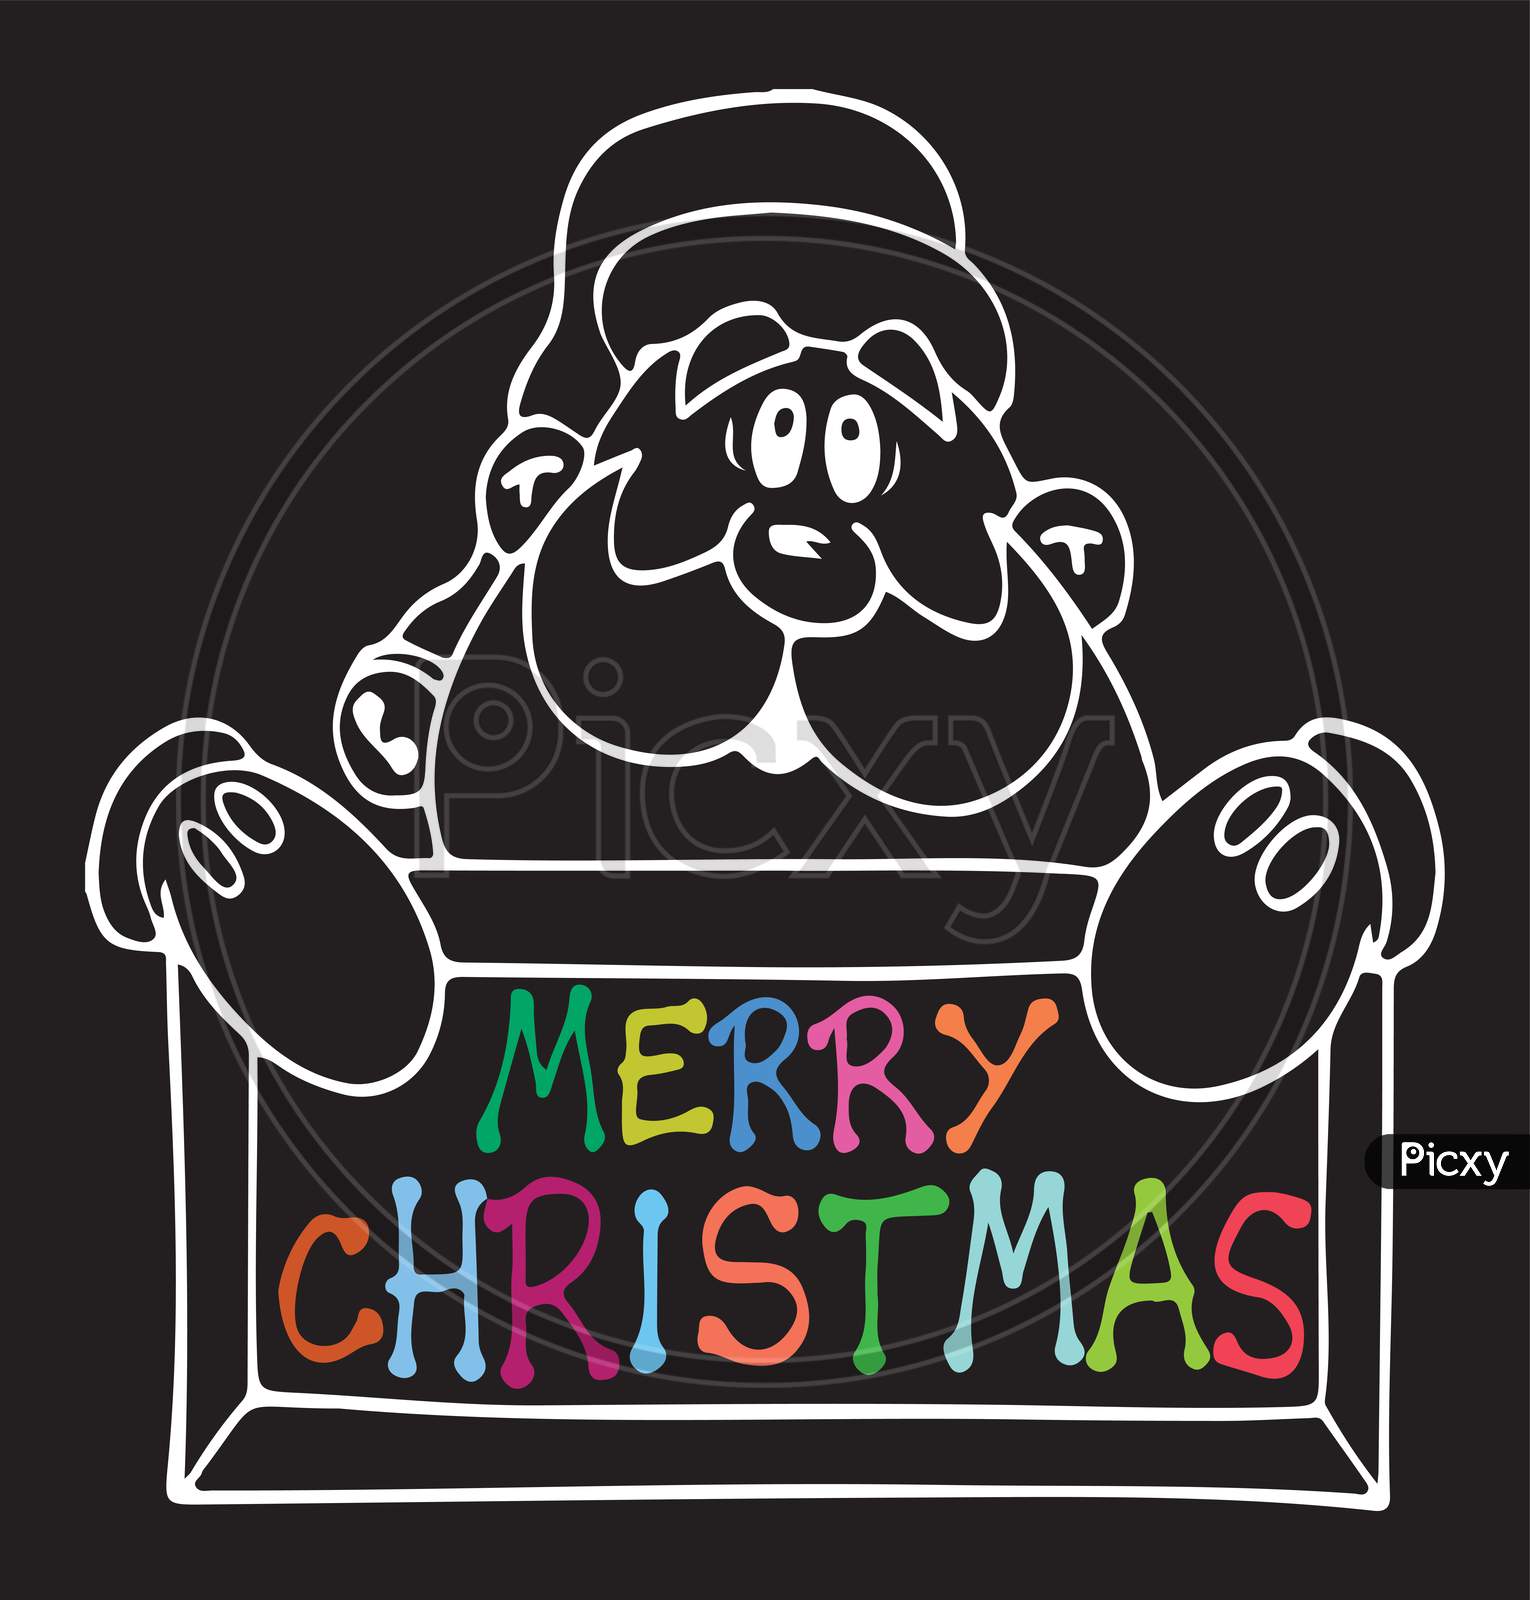 Sketch Of Happy Or Merry Christmas And Happy New Year Wishing Greeting Card Editable Illustration